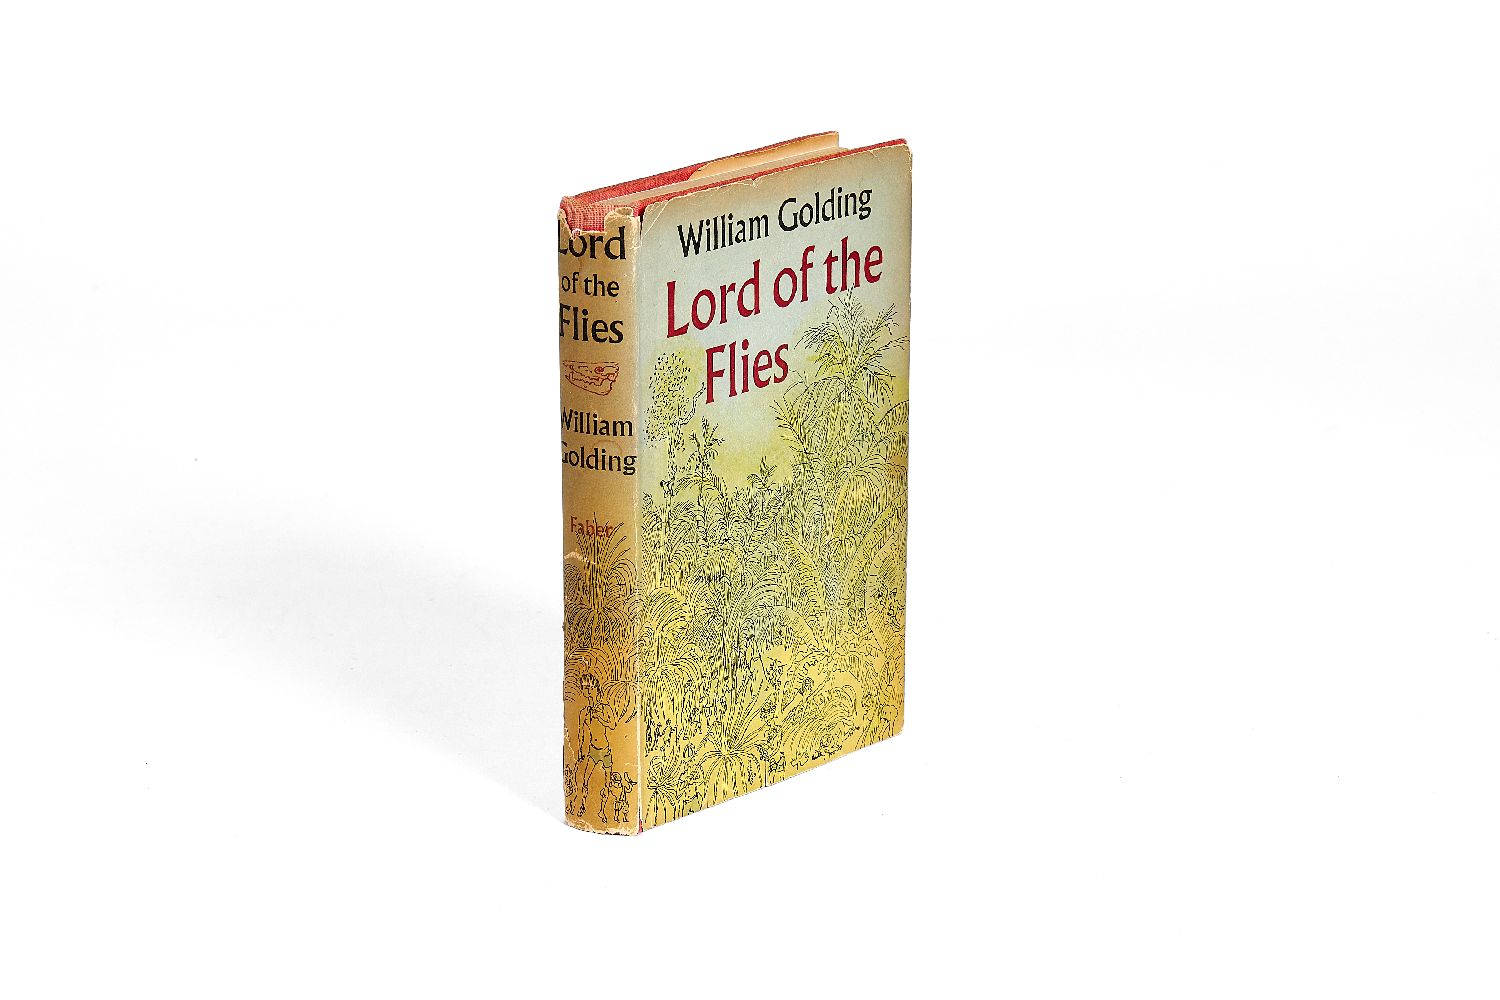 Ɵ William Golding, Lord of the Flies, first edition, dedication copy signed by the author